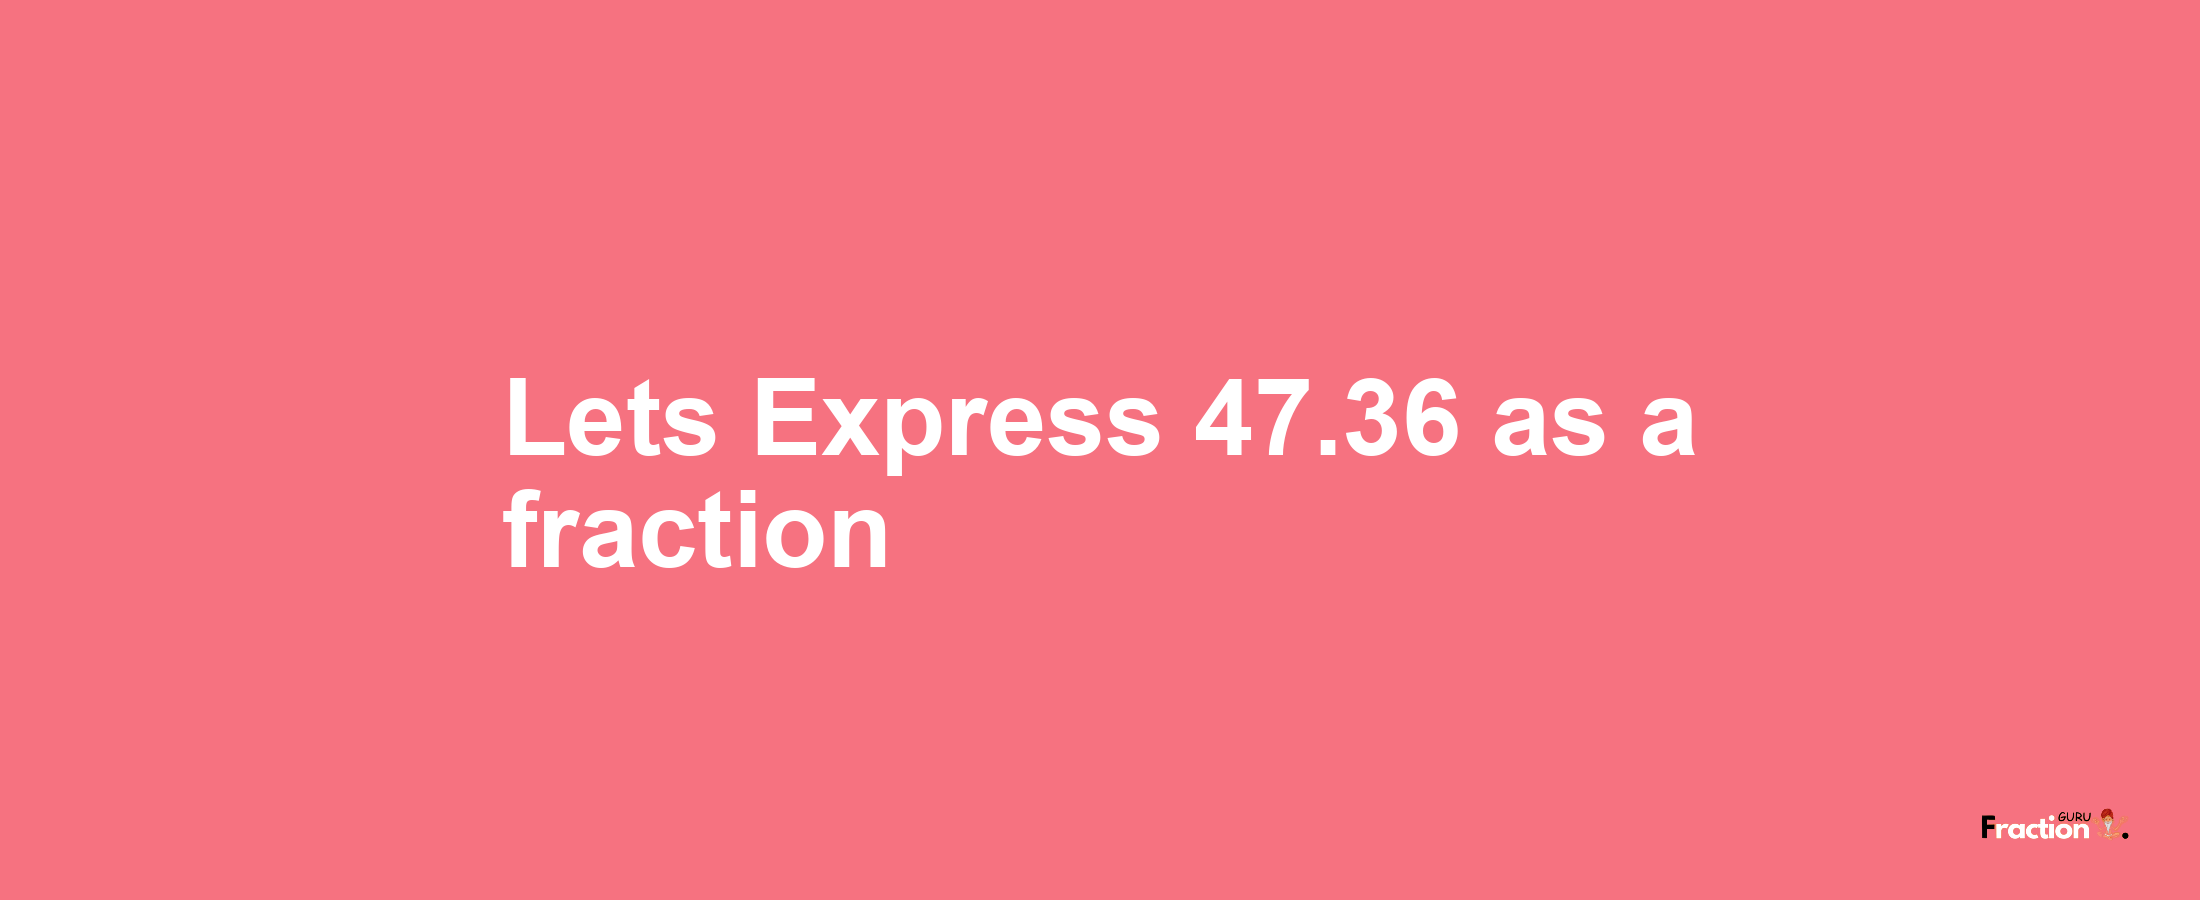 Lets Express 47.36 as afraction